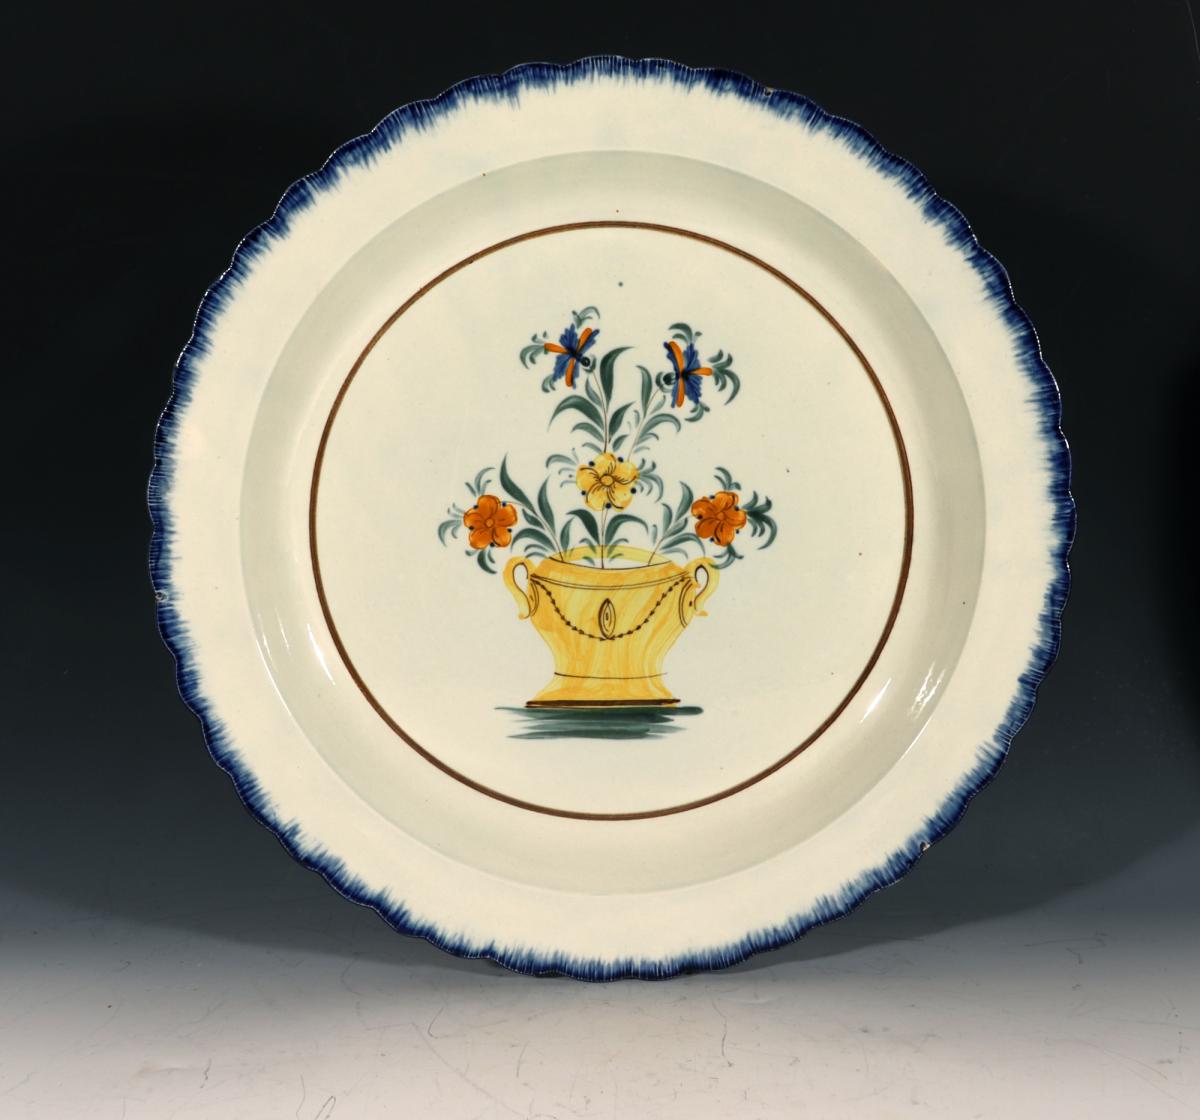 English Creamware Pottery Large Shell-edge Dish with Prattware Decoration of Flowers in Urn, Circa 1800-1810